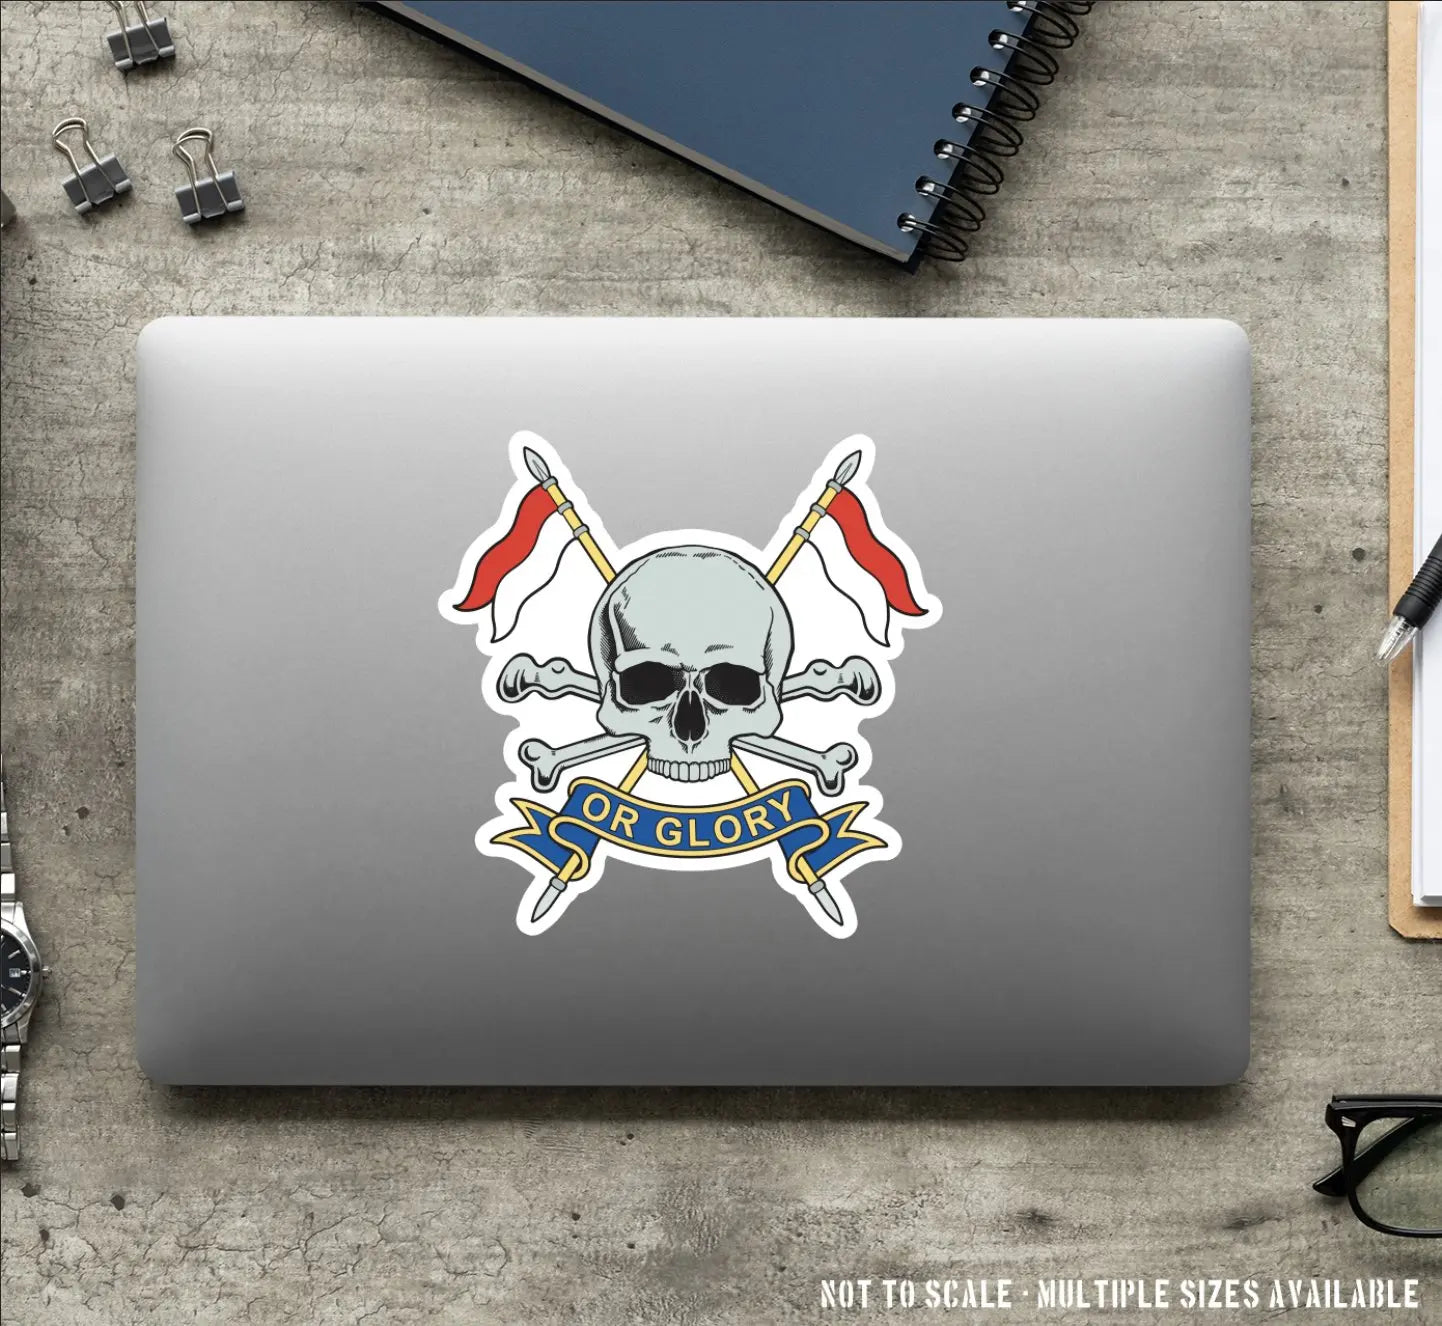 Royal Lancers Waterproof Vinyl Stickers - Official MoD Reseller FREE SHIPPING redplume